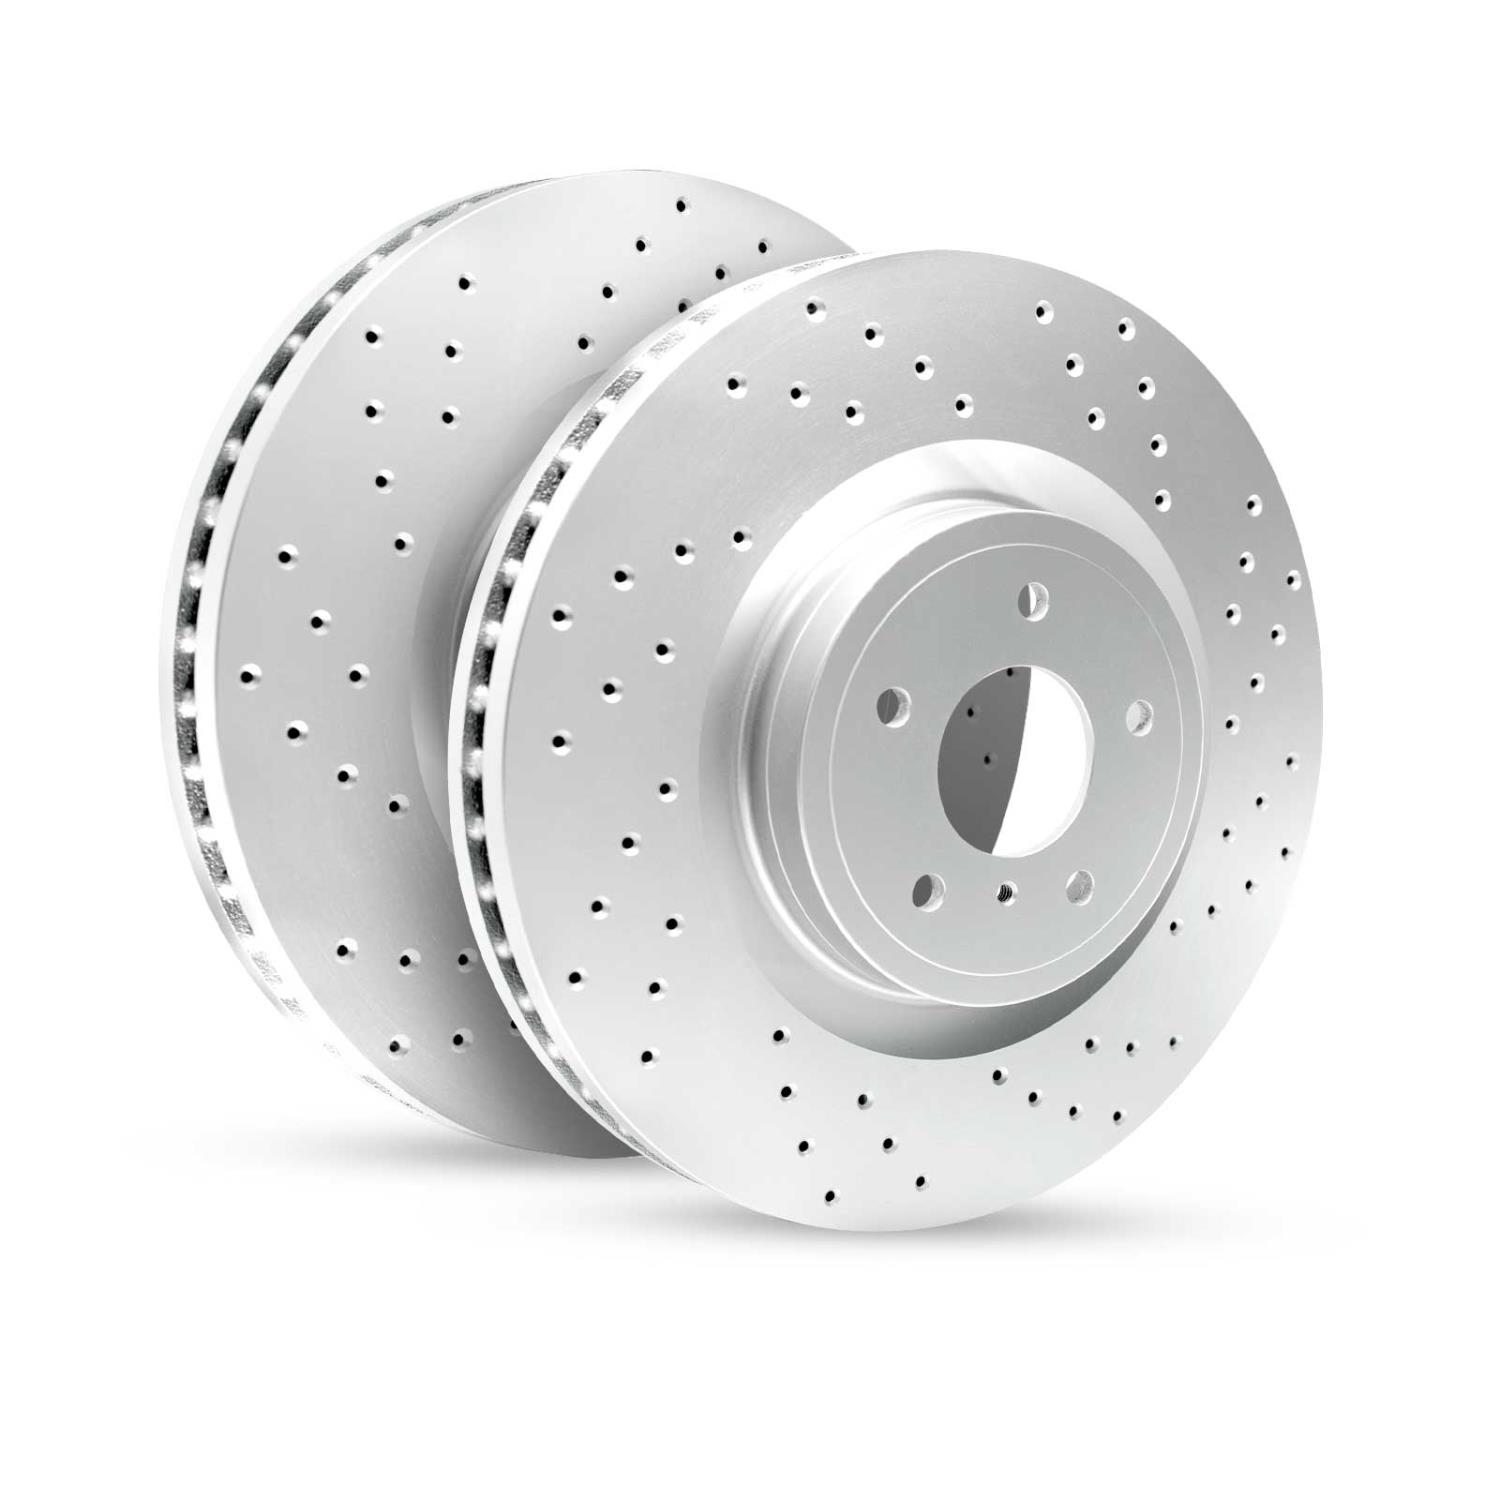 GEO-Carbon Drilled & Slotted Brake Rotor Set, Fits Select Lexus/Toyota/Scion, Position: Rear